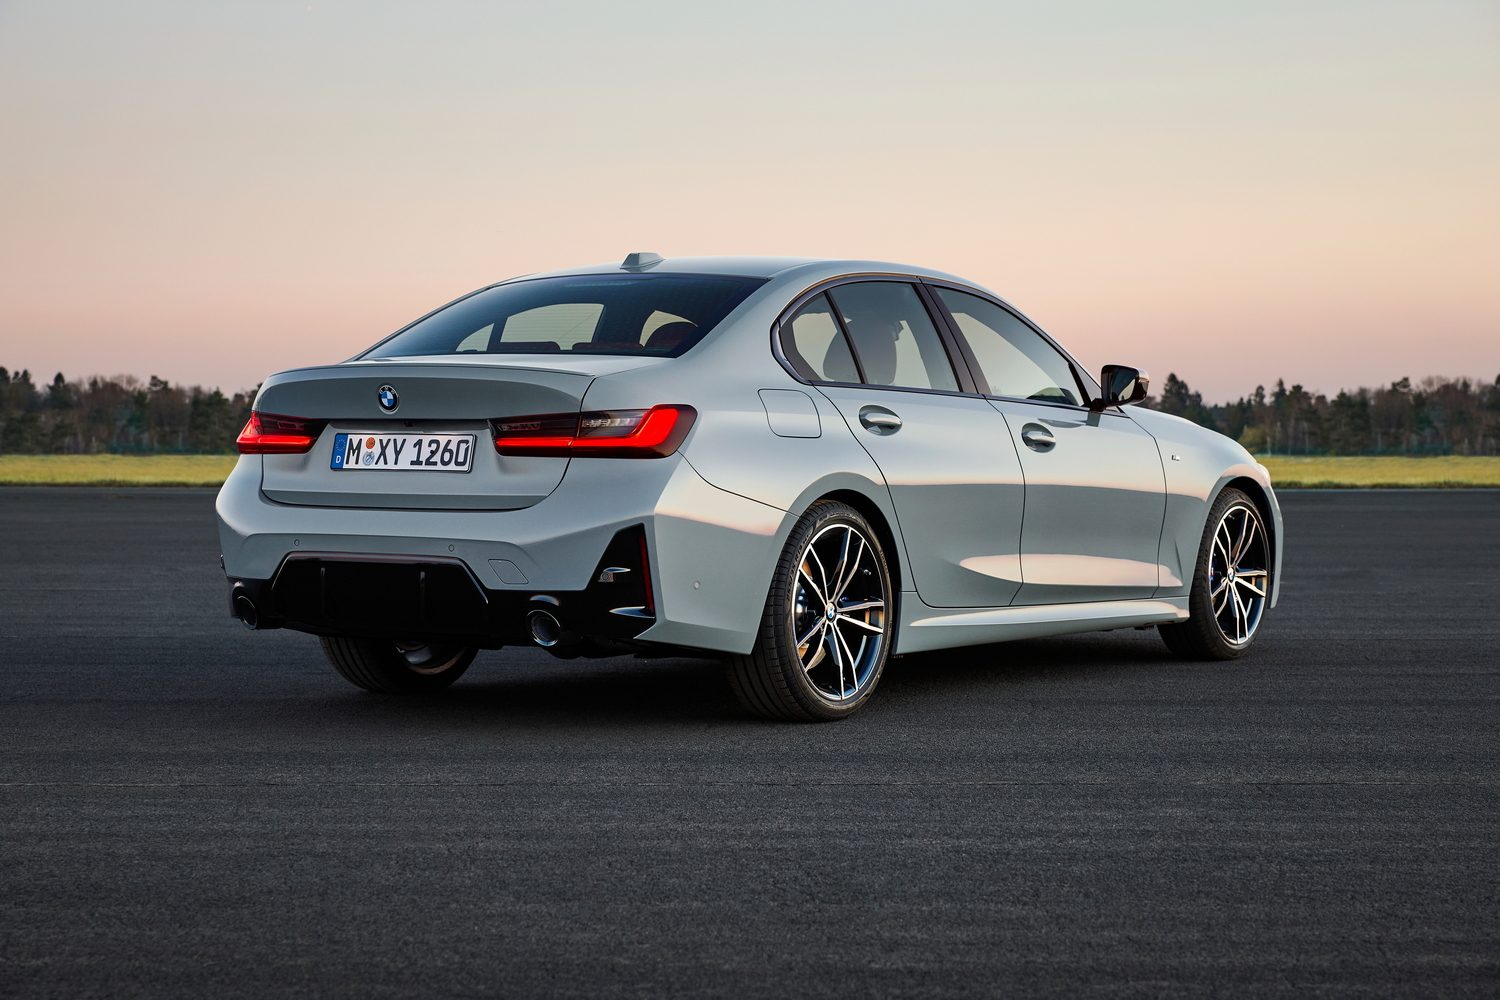 Updated BMW 3 Series in Ireland this year